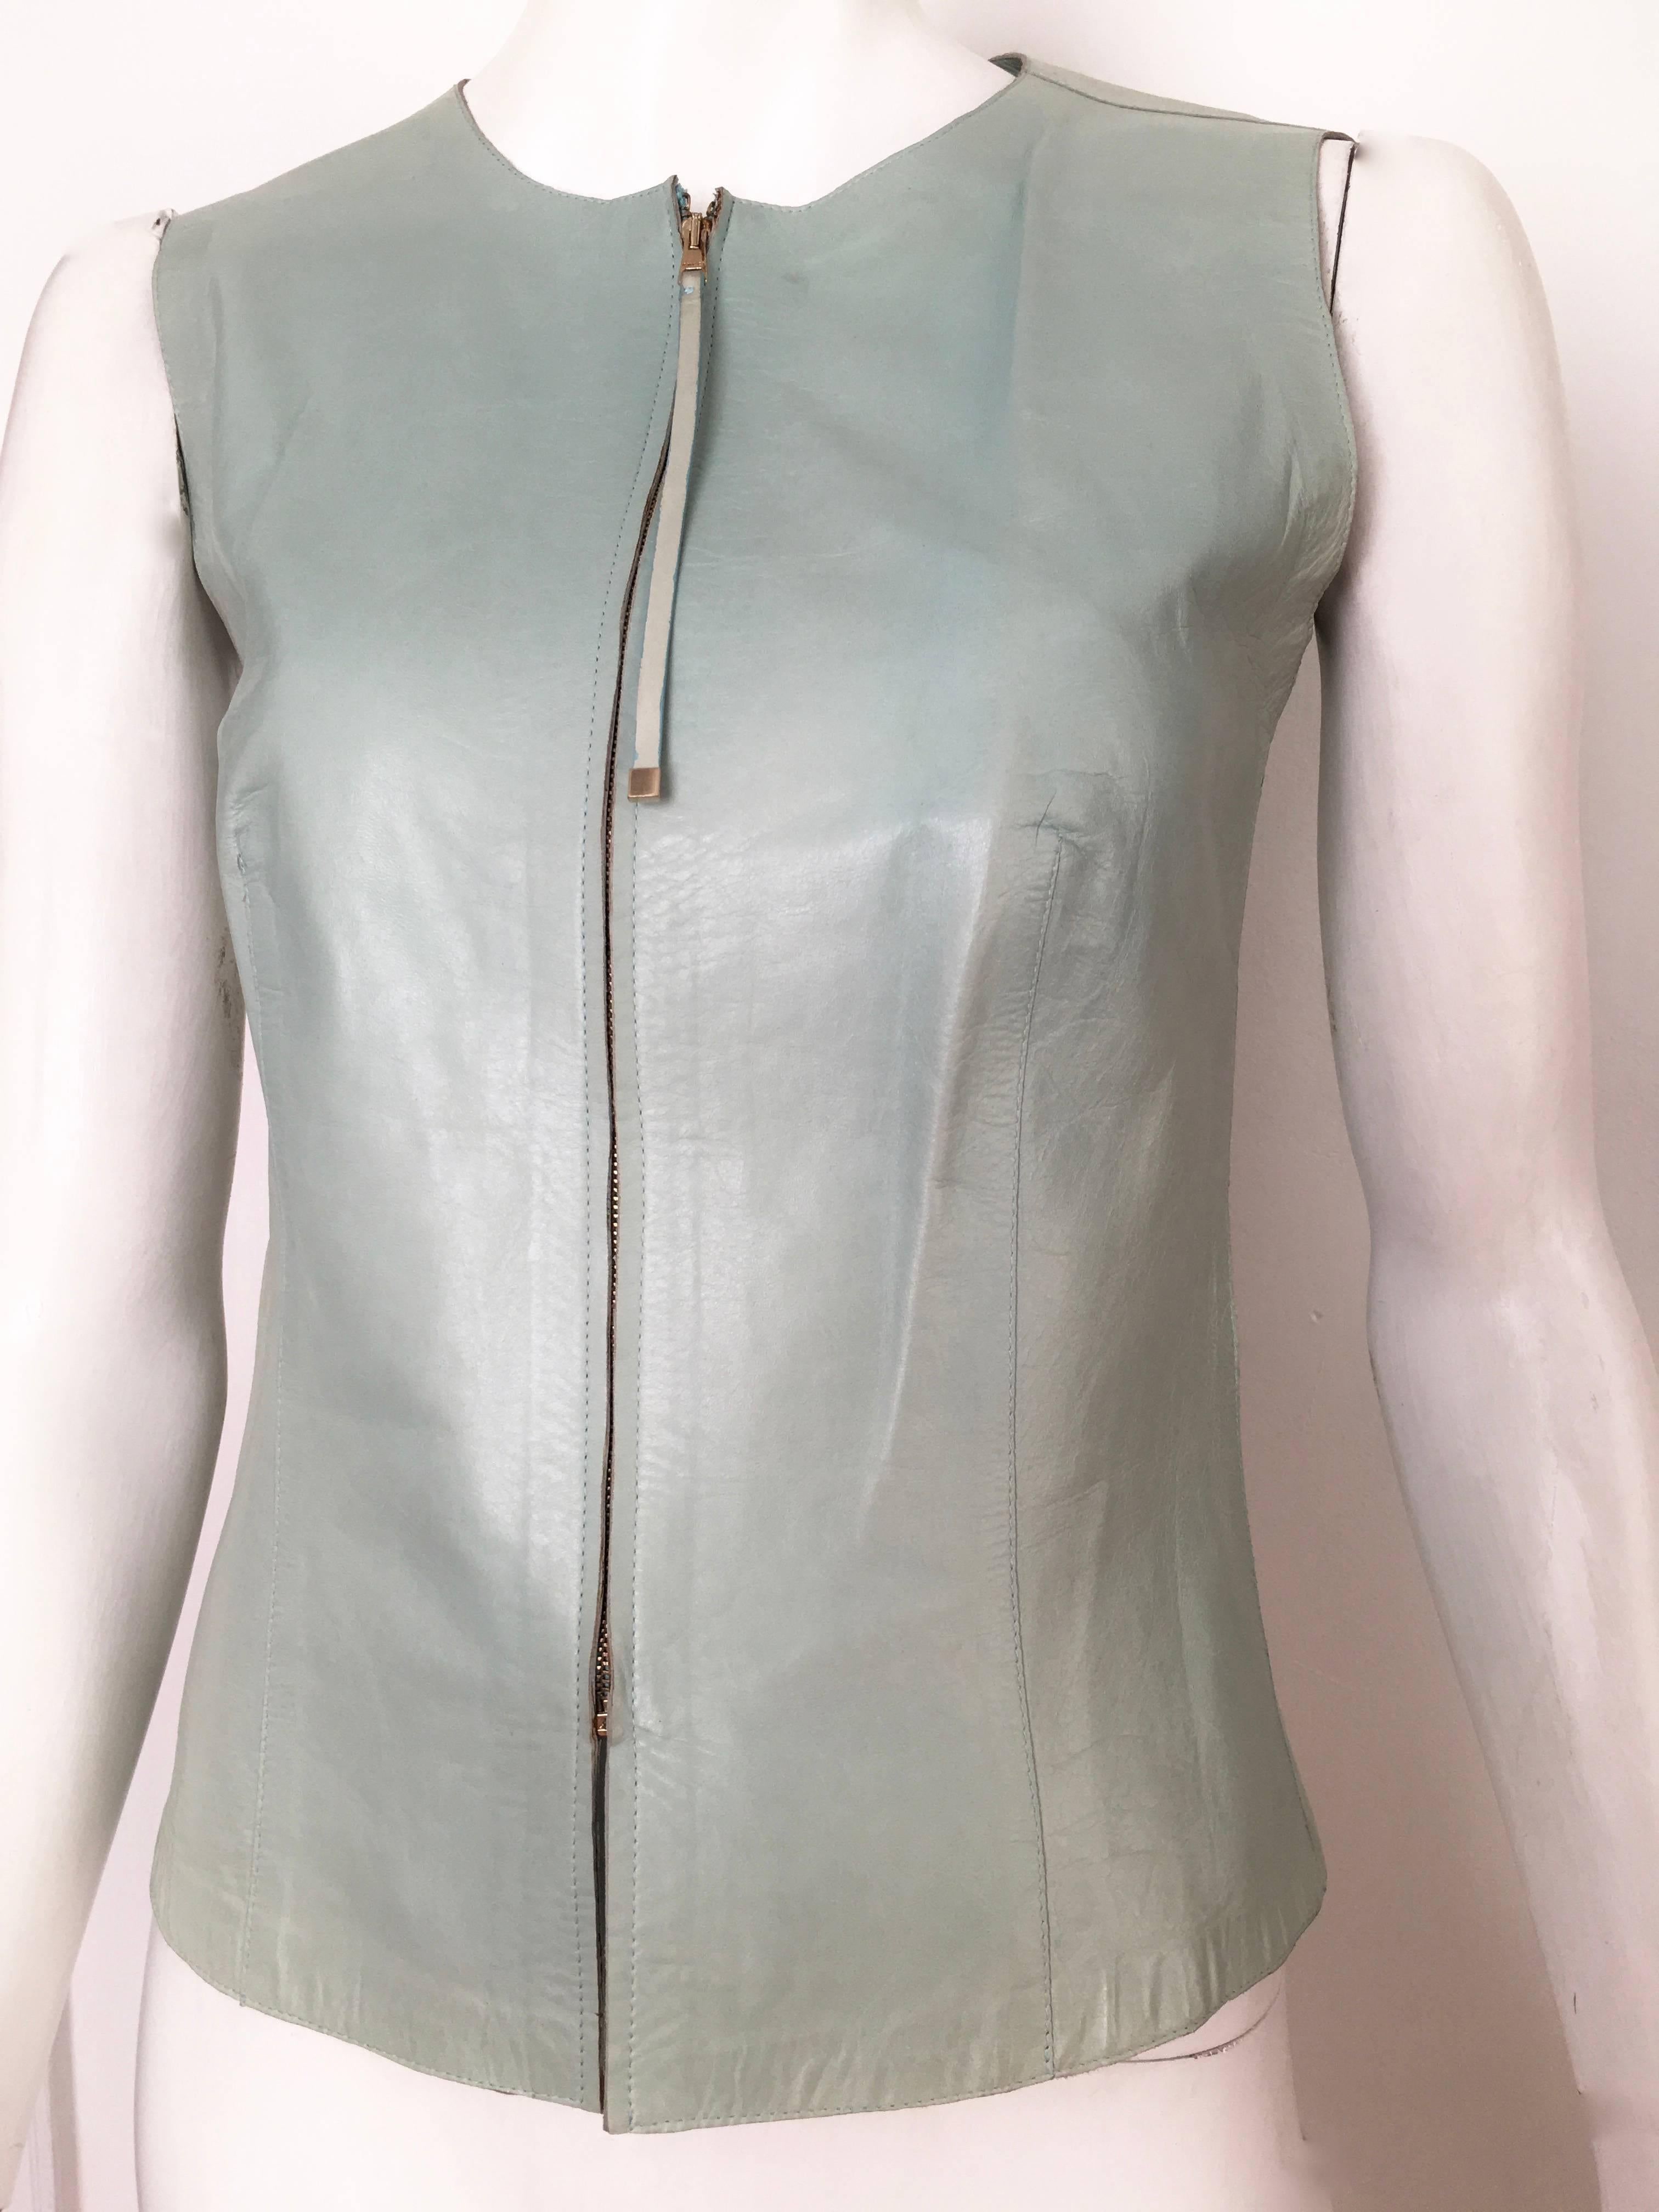 Gucci by Tom Ford late 1990s leather aqua zipper vest is an Italian size 40 or an USA size 4.  This vest was purchased by my client at Neiman Marcus and never worn, it settled into the back of her closet for years. Ladies please grab your trust